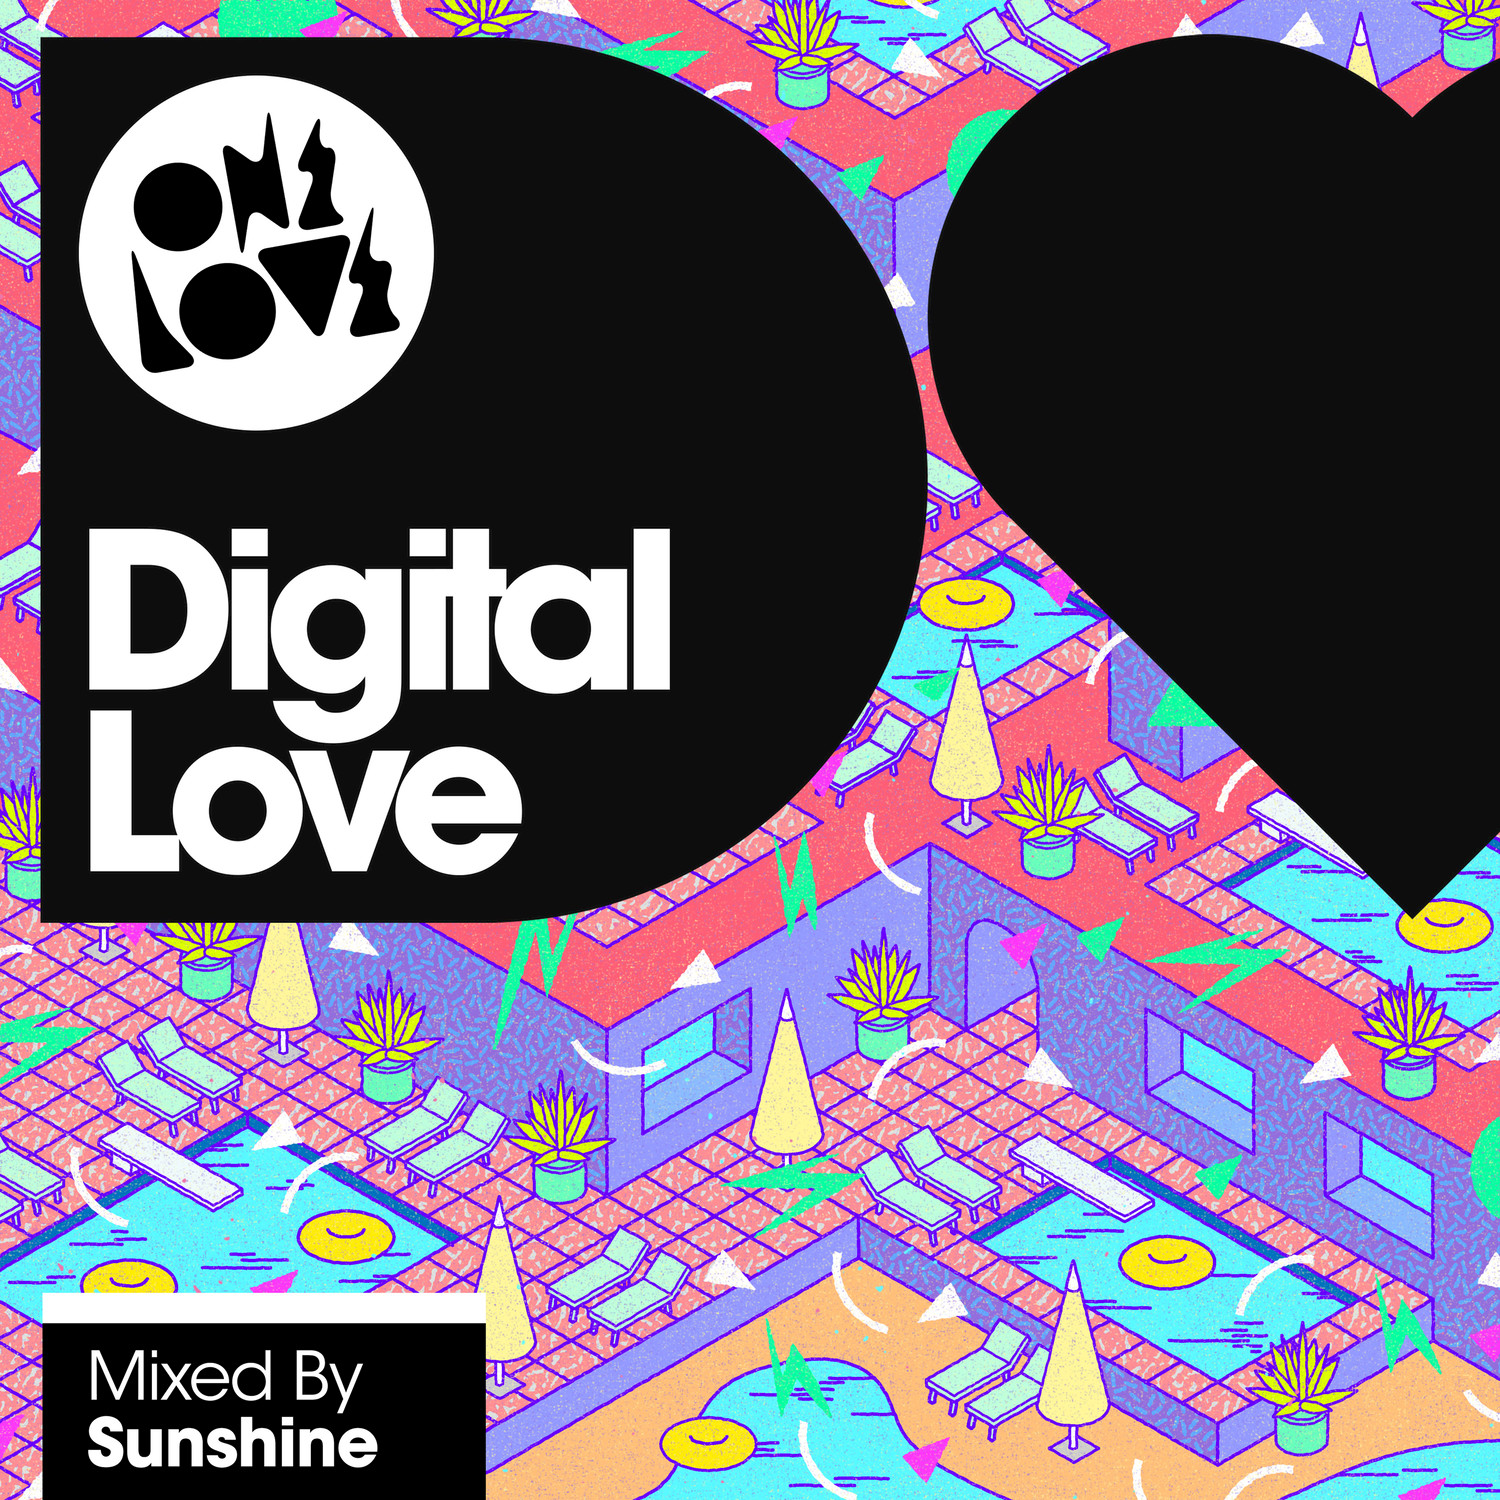 Onelove Digital Love (Mixed by Sunshine)